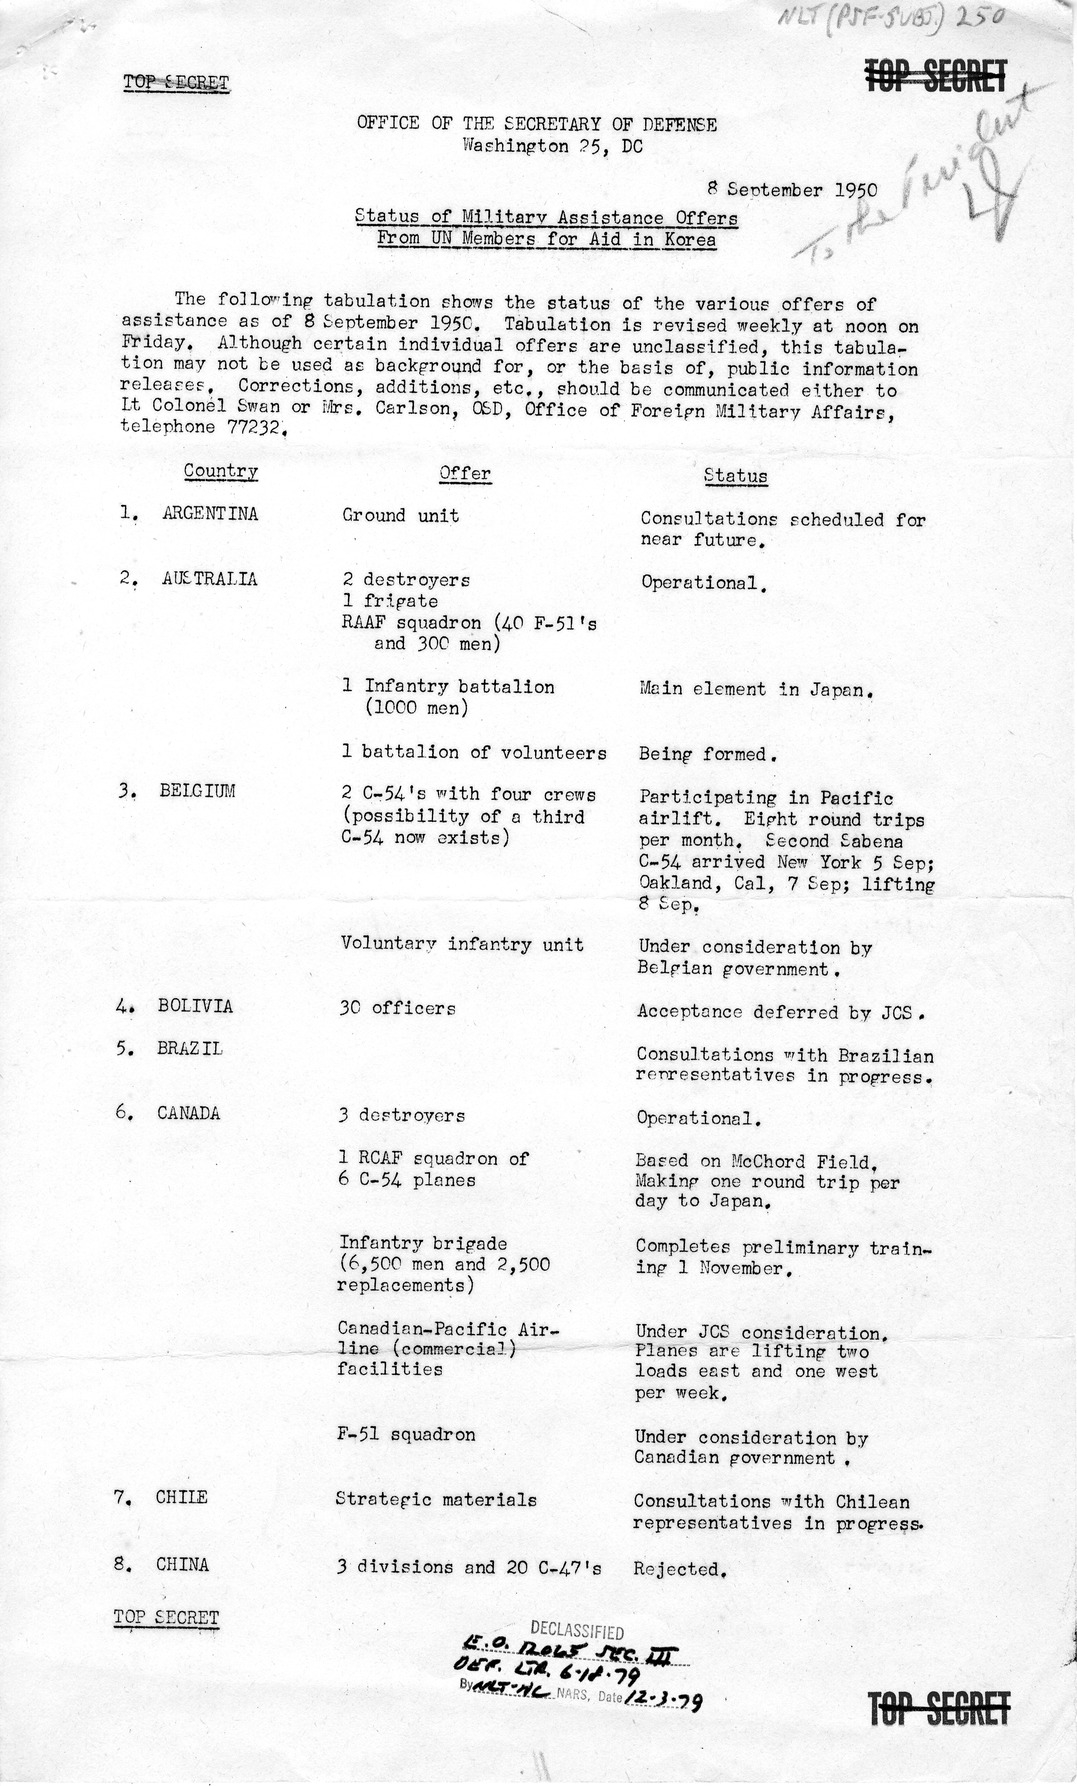 Memorandum from the Office of the Secretary of Defense to President Harry S. Truman with Attachments